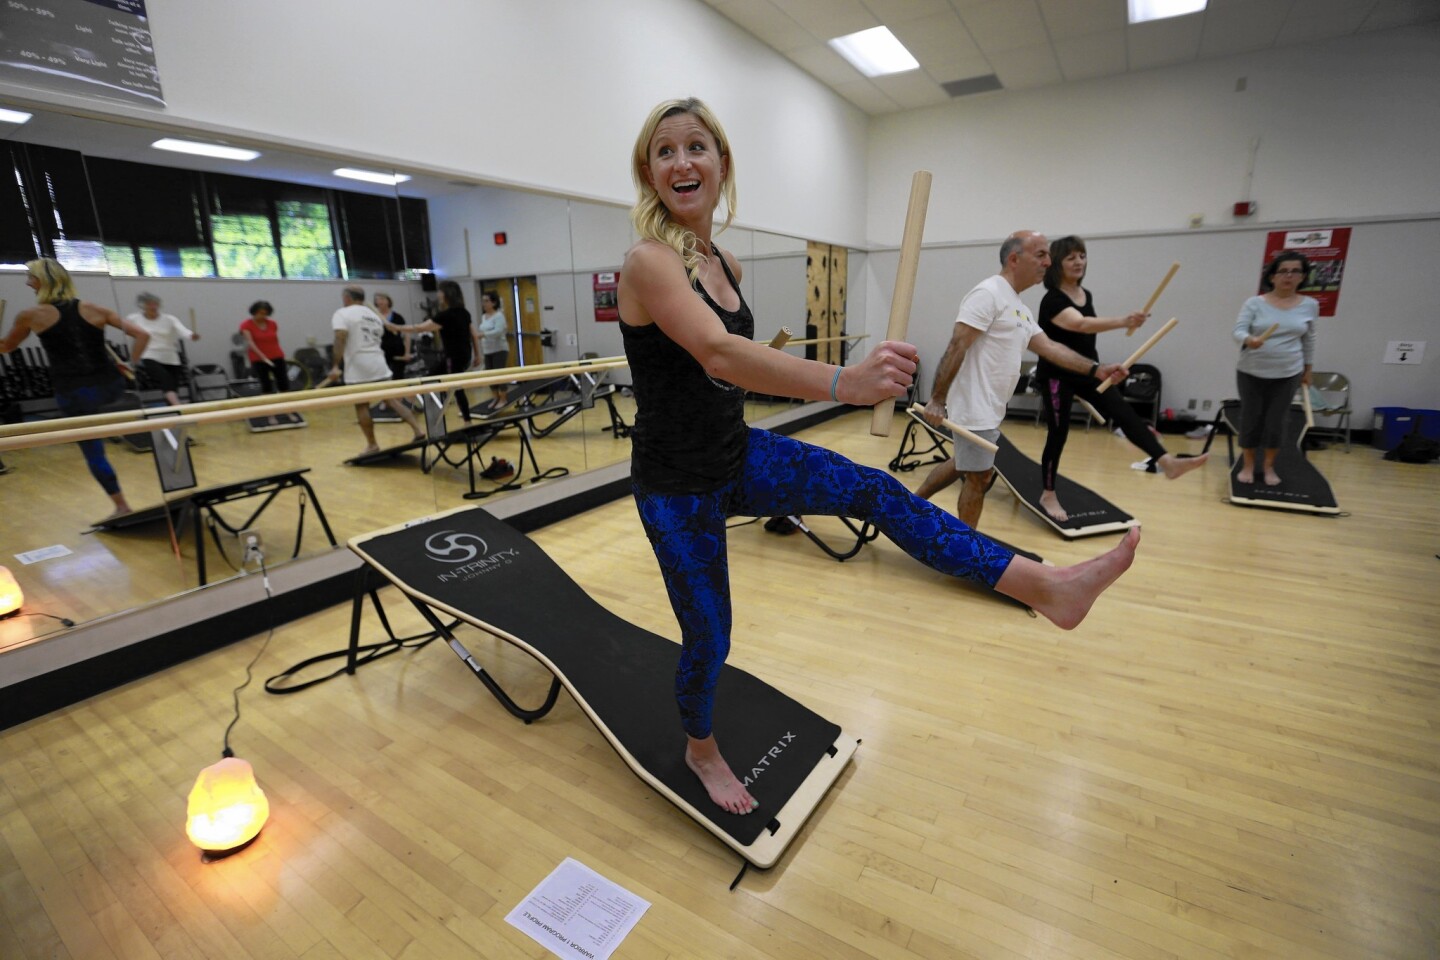 Ayla Donlin leads an In-Trinity class at the LifeFit Center on the campus of Cal State Long Beach. It involves stretching, strengthening and balancing exercises on a slant board.